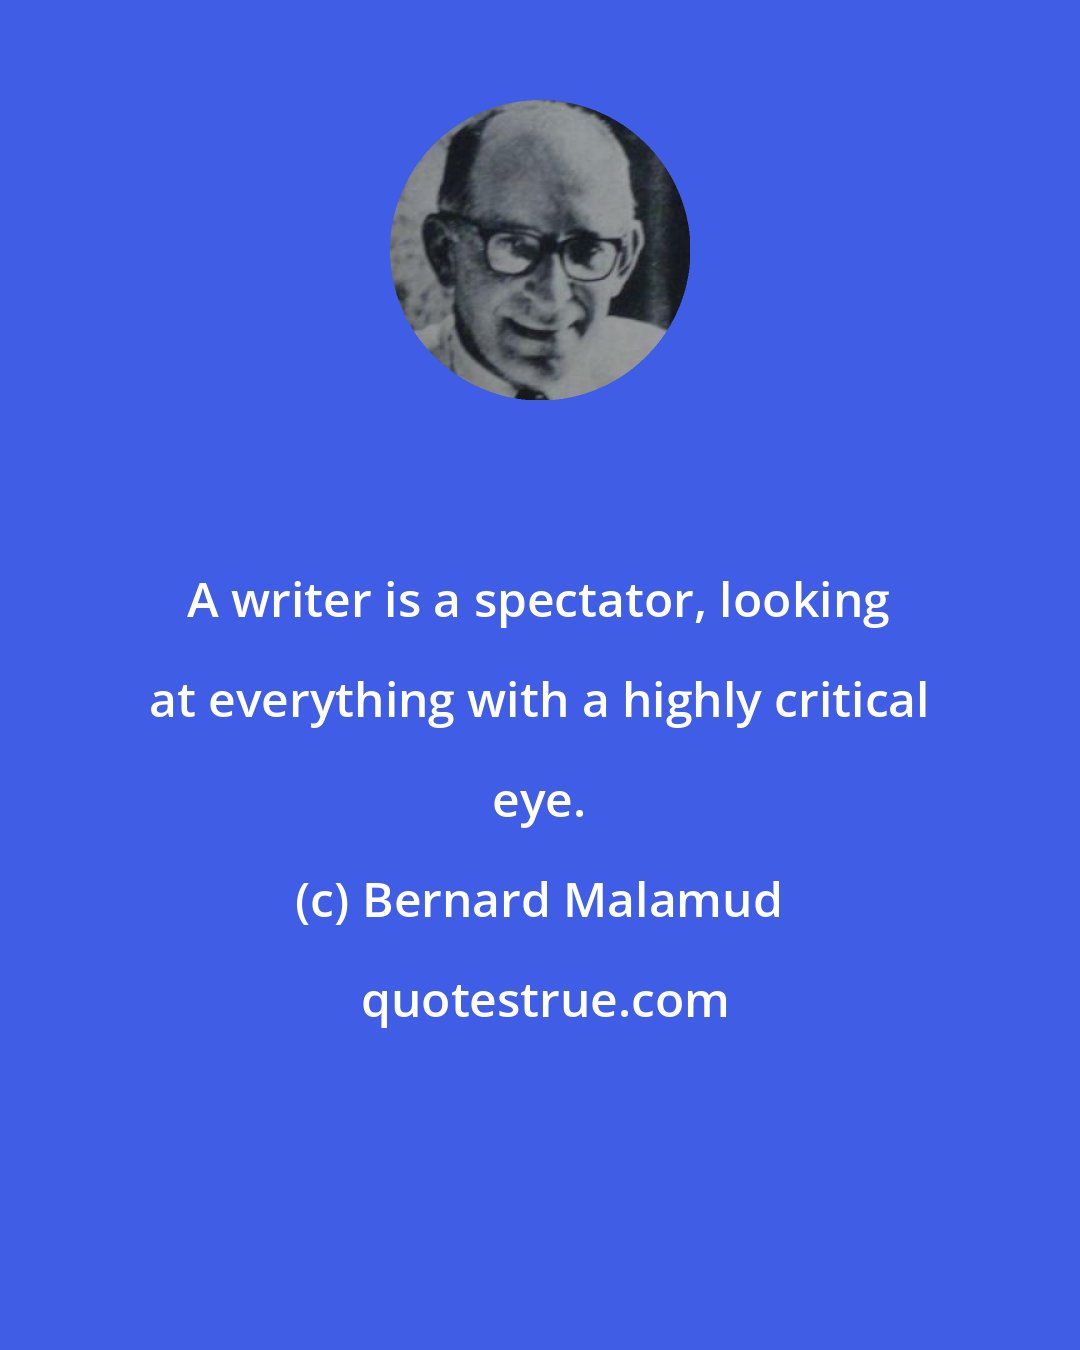 Bernard Malamud: A writer is a spectator, looking at everything with a highly critical eye.